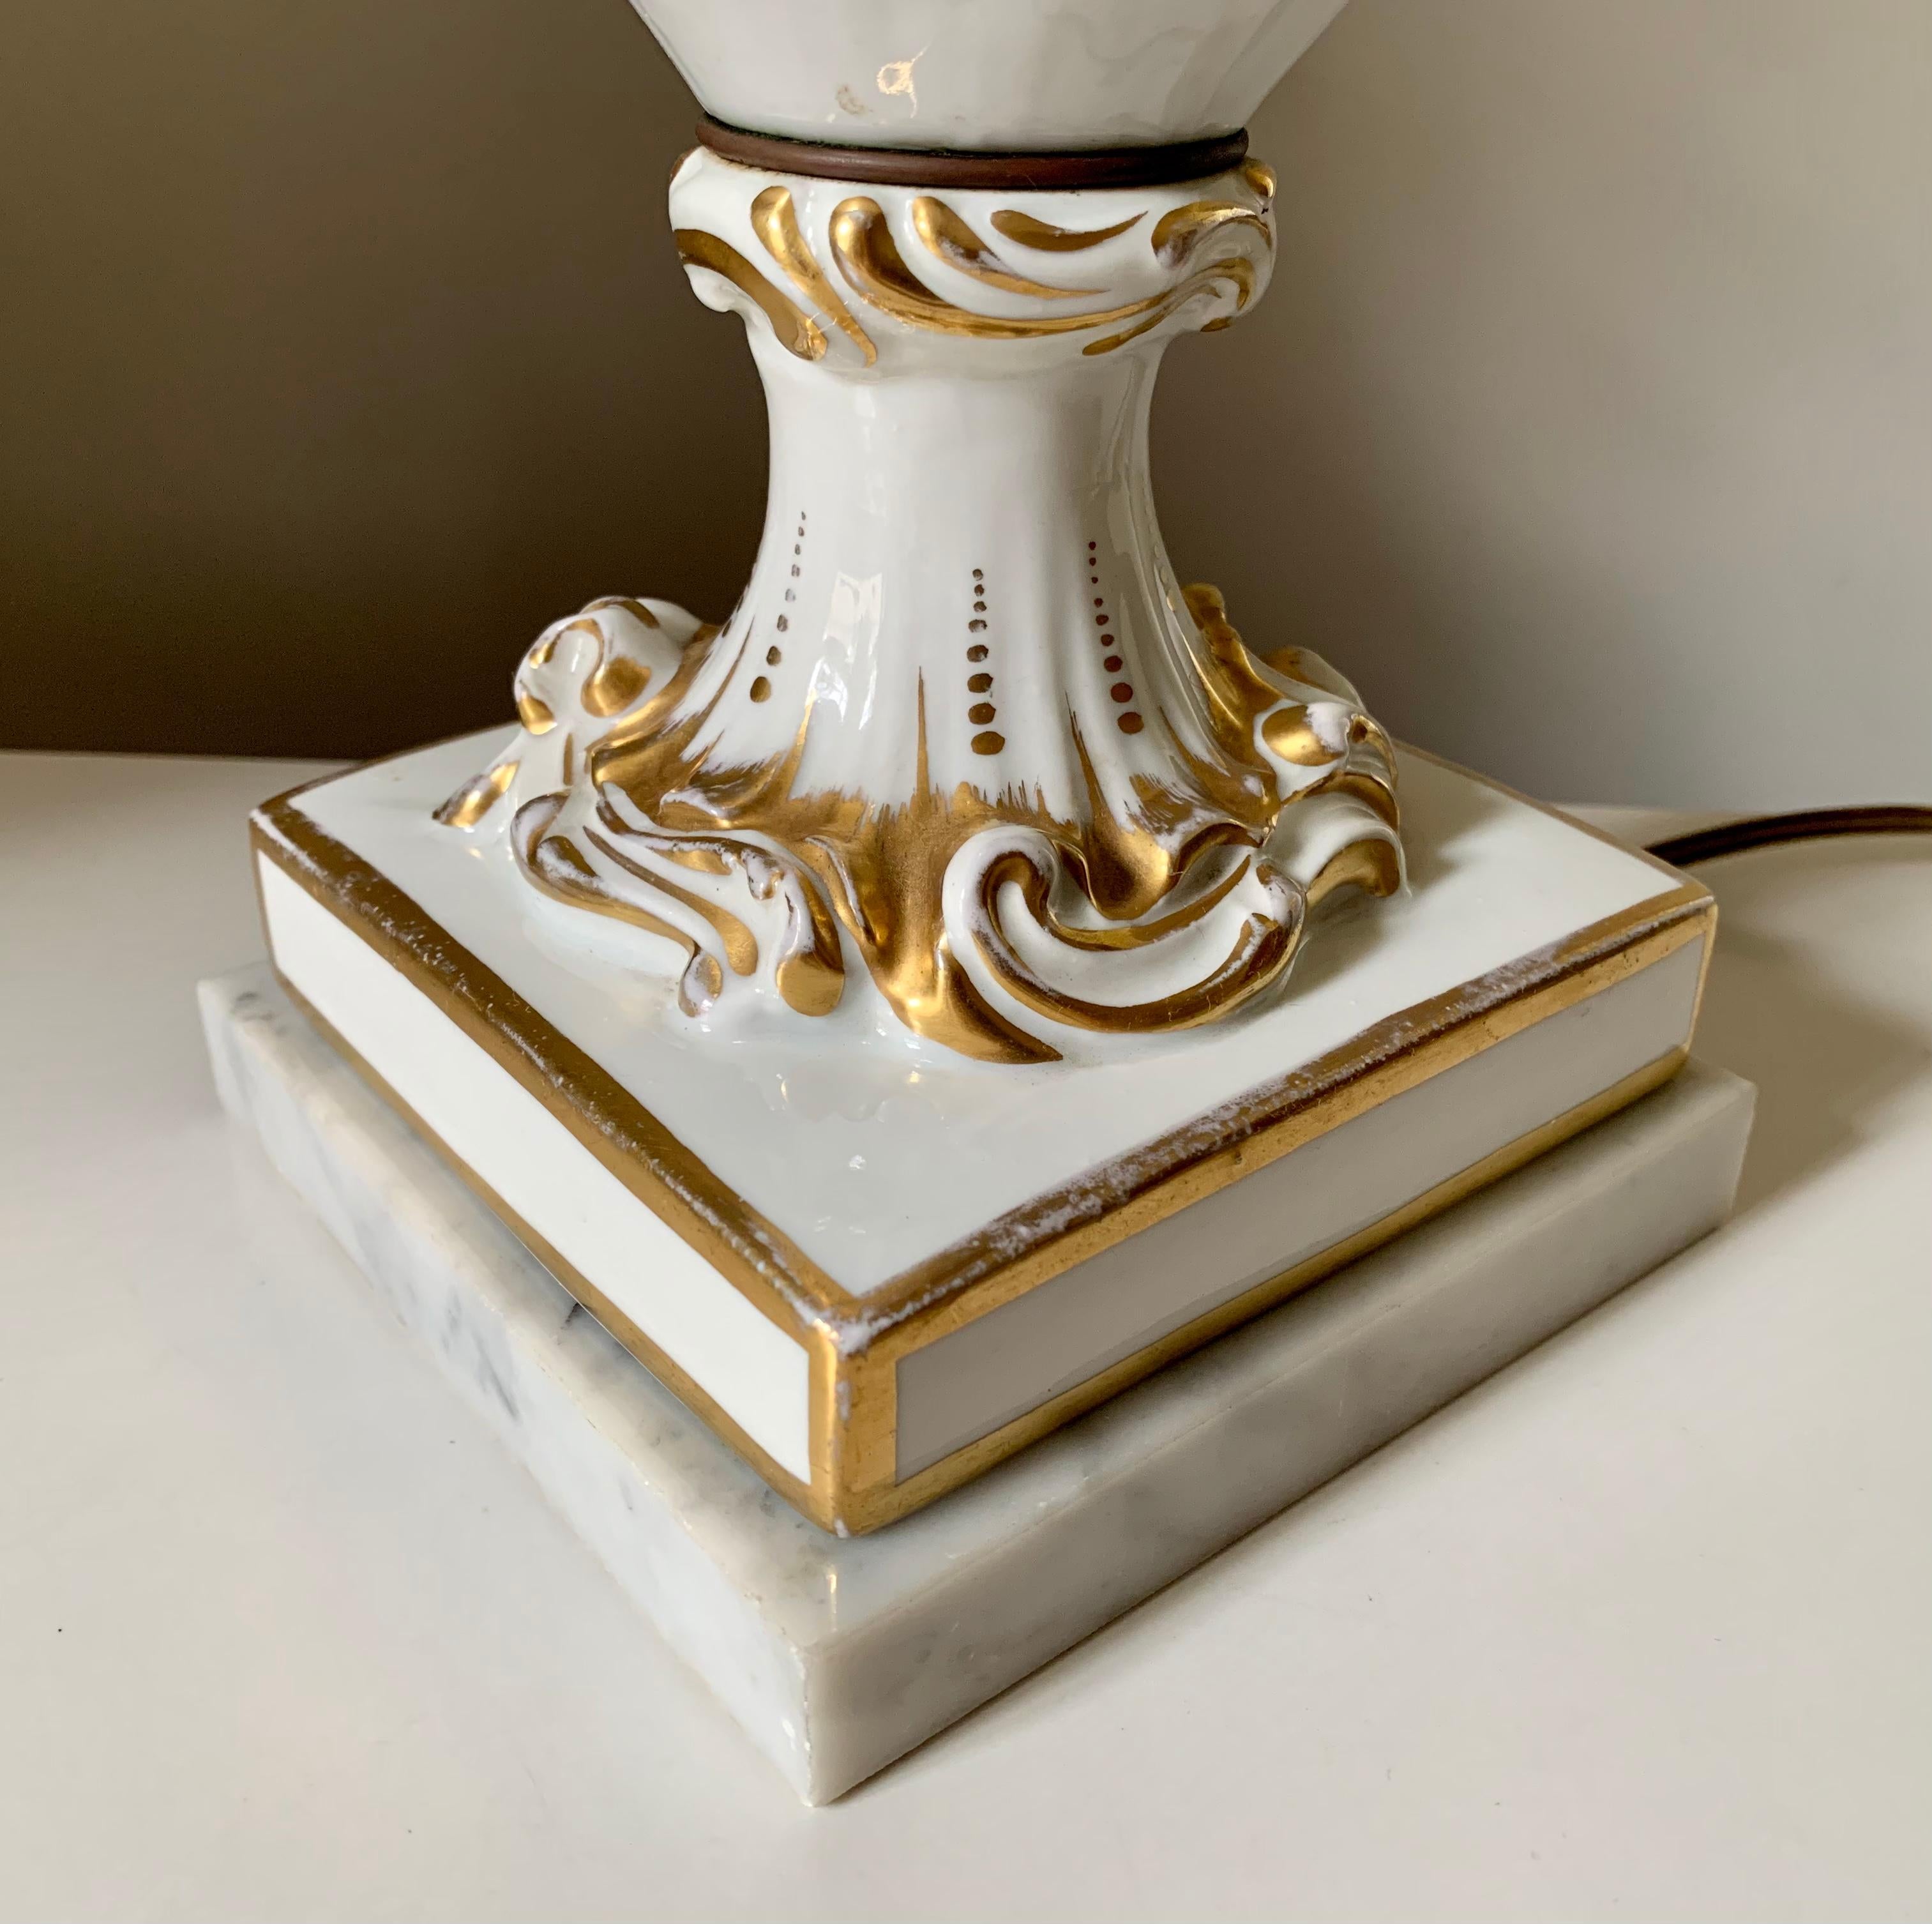 European Fine Pair Rococo Style White and Gold Porcelain Table Lamps, 19th Century For Sale